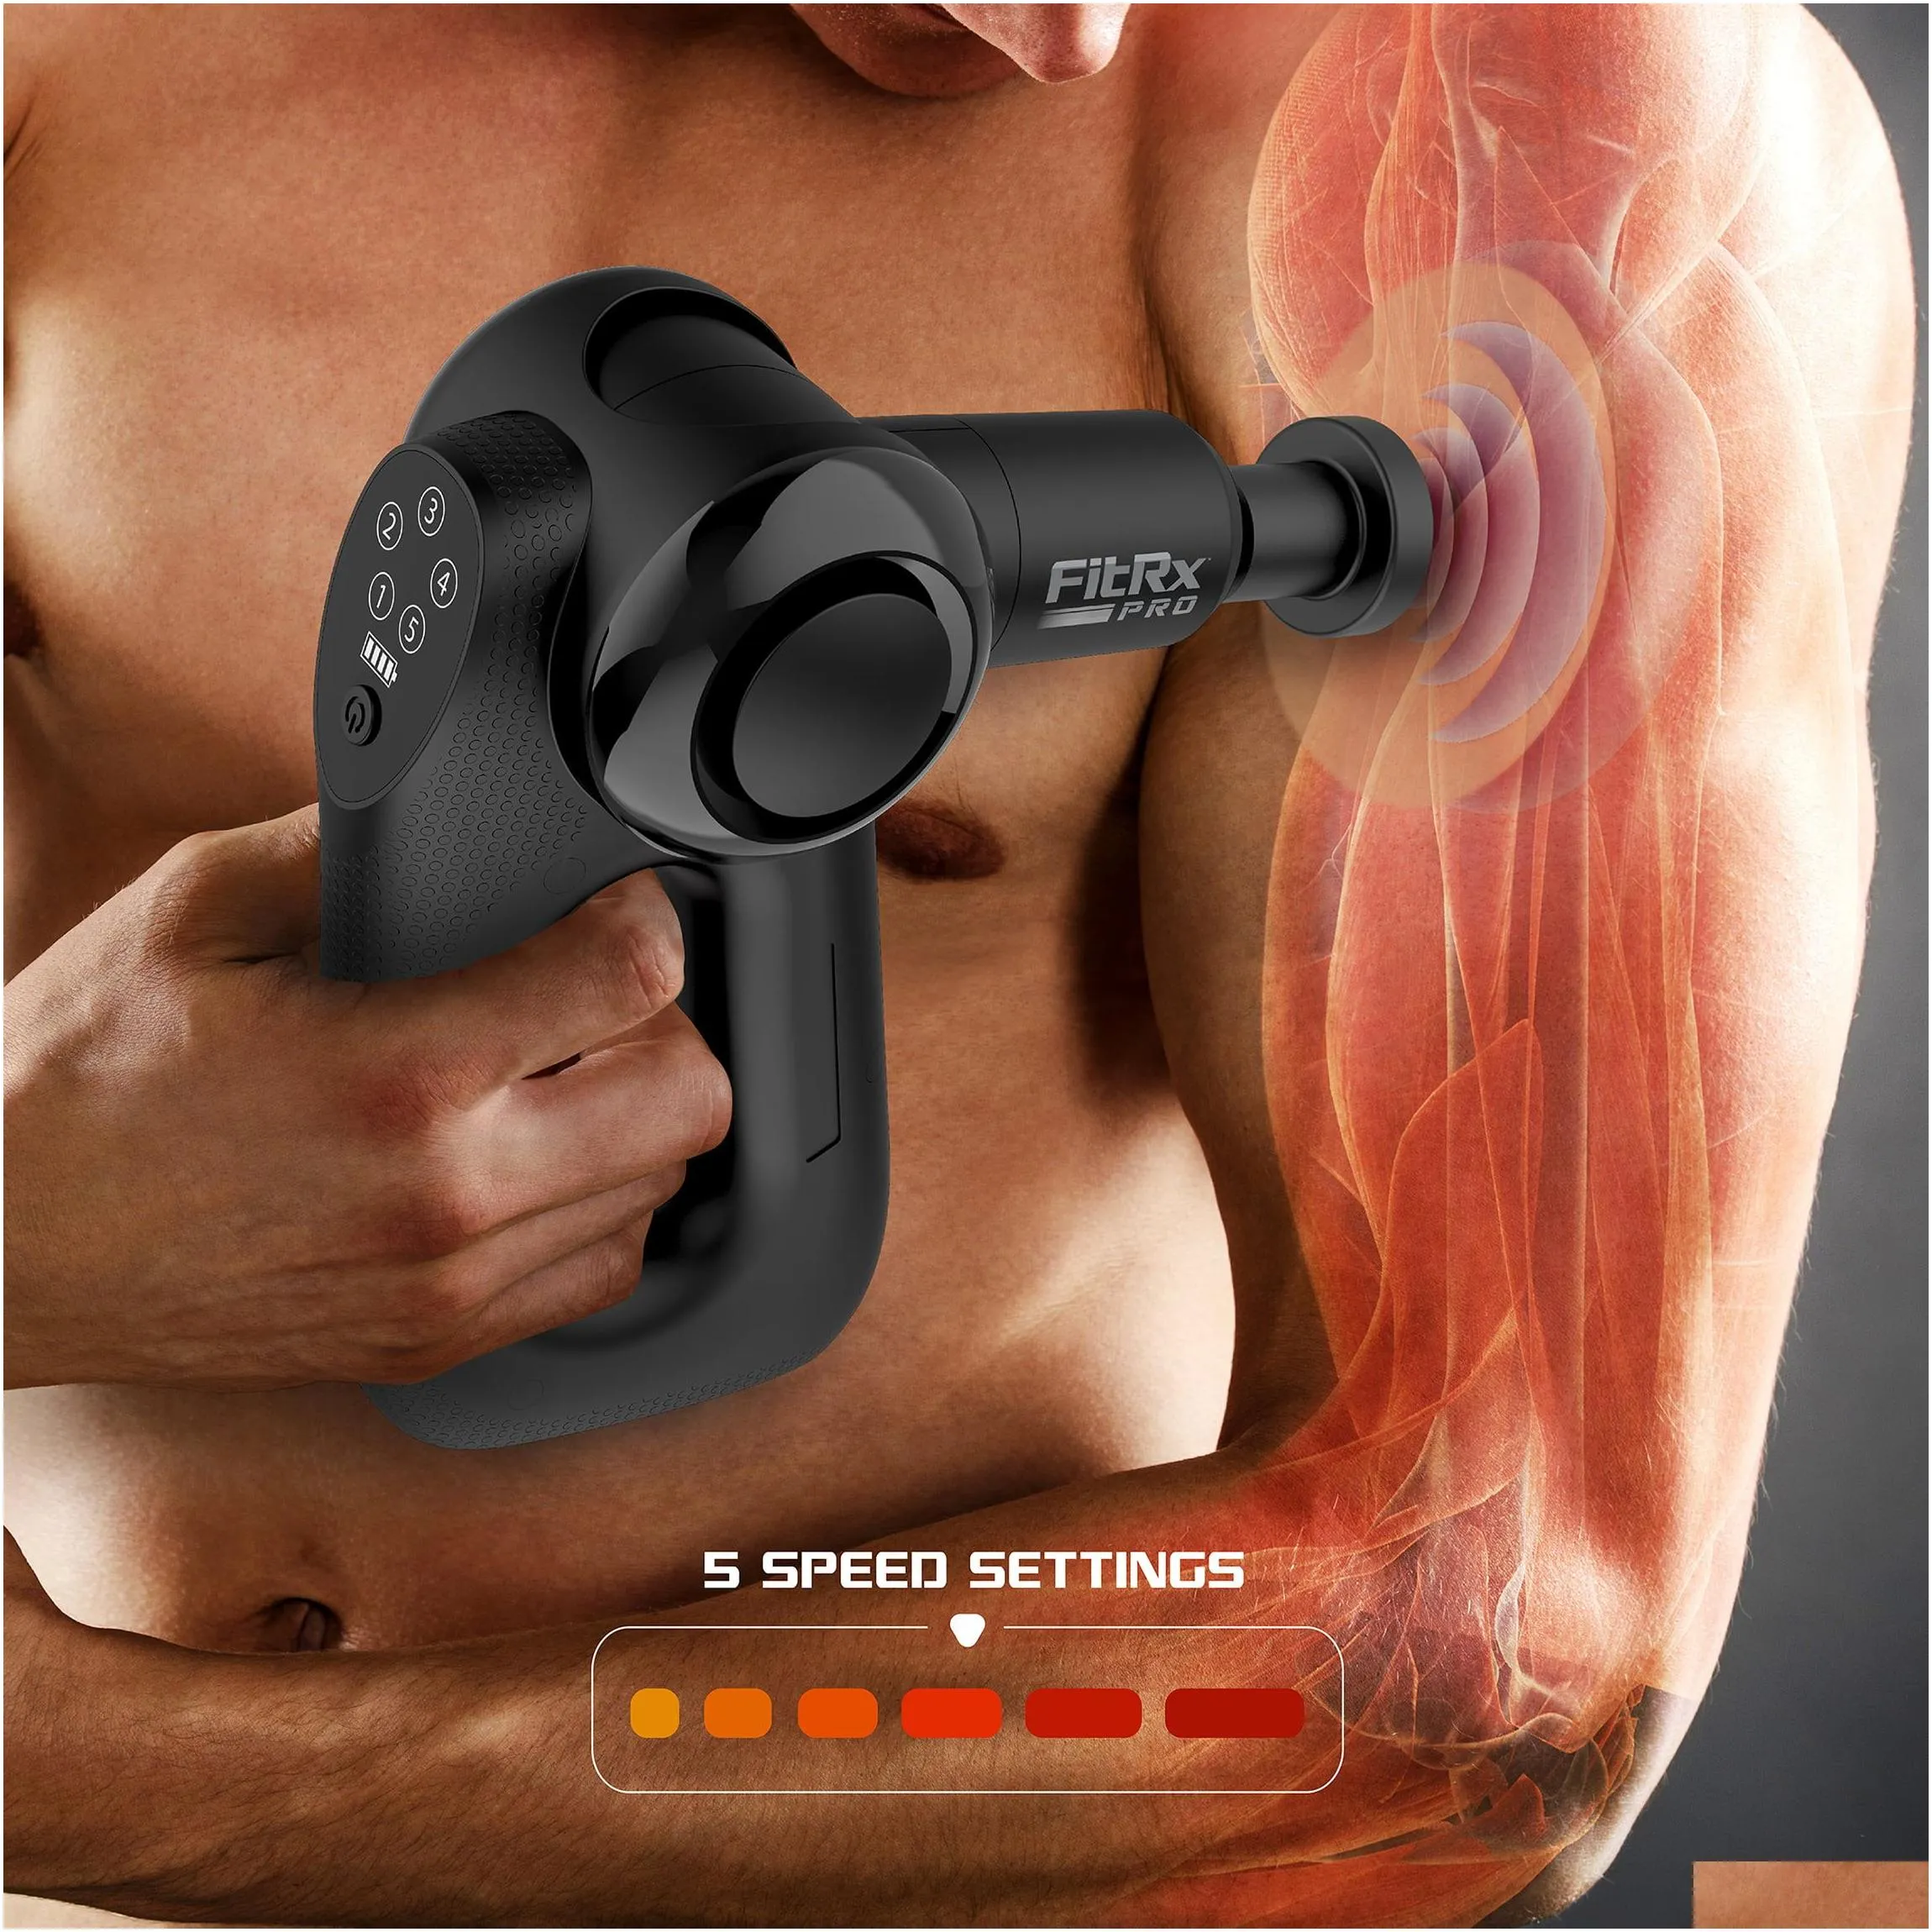 Other Sporting Goods Pro Muscle Mas Gun Handheld Percussion Masr With Mtiple Speeds And Attachments For Neck Back Drop Delivery Sports Dh9Gs